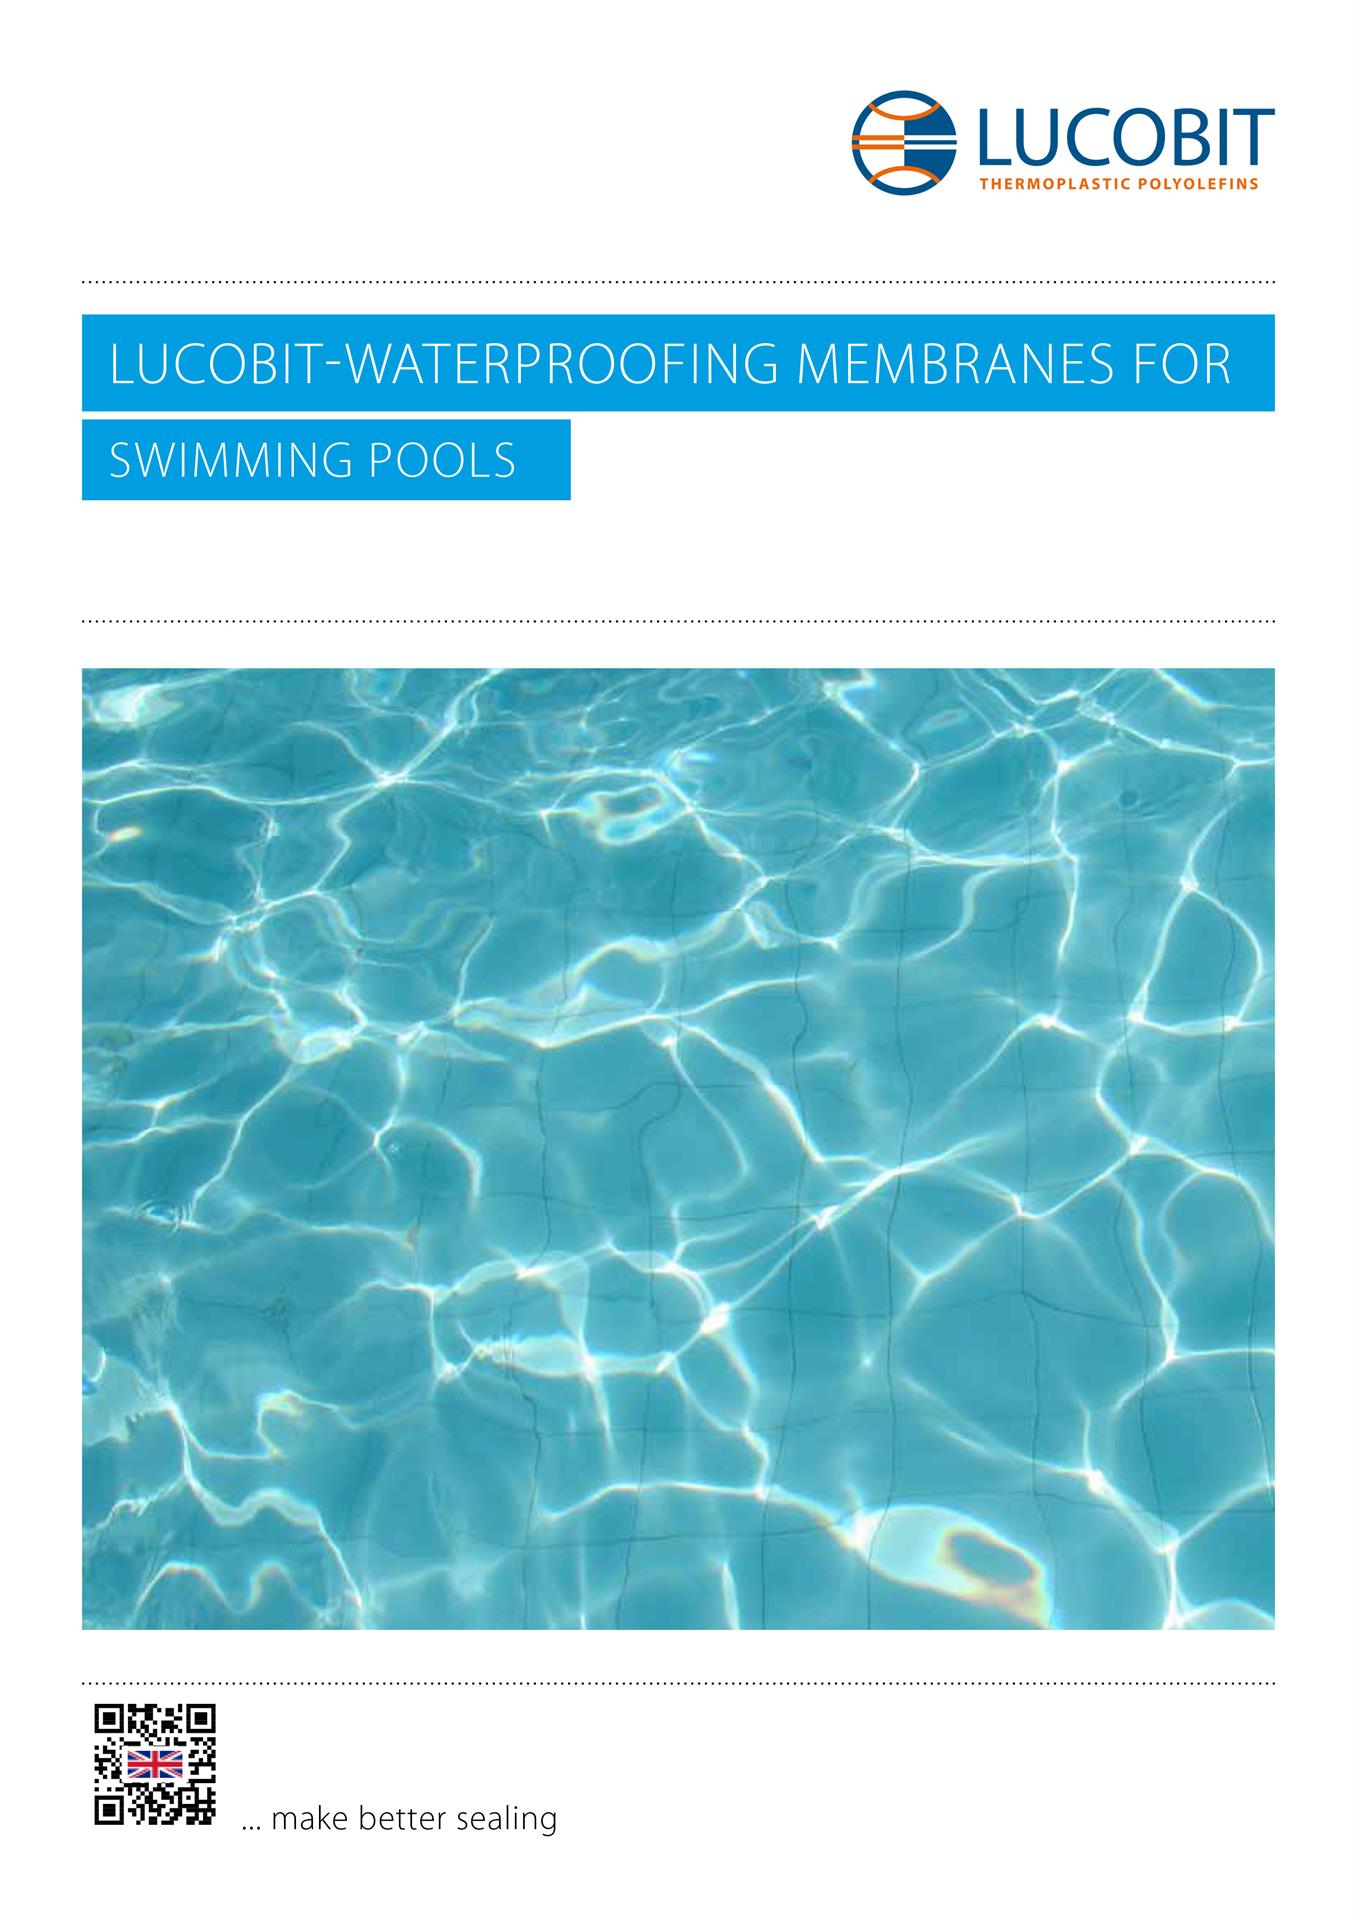 LUCOBIT Brochure - LUCOBIT-WATERPROOFING MEMBRANES FOR SWIMMING POOLS